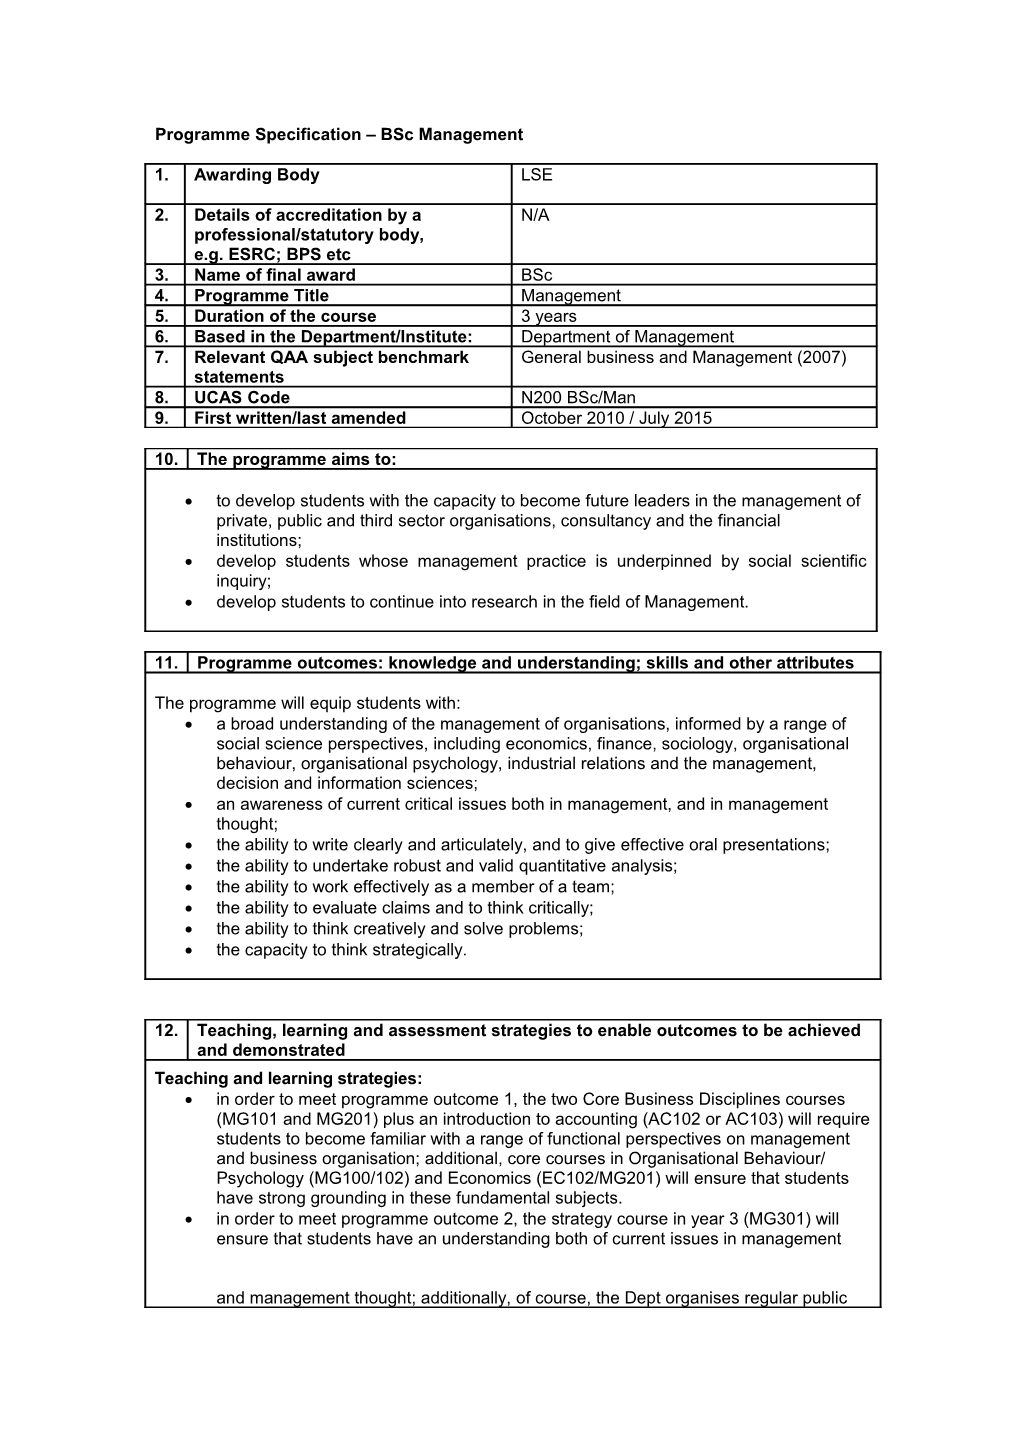 Programme Specification Bsc Management